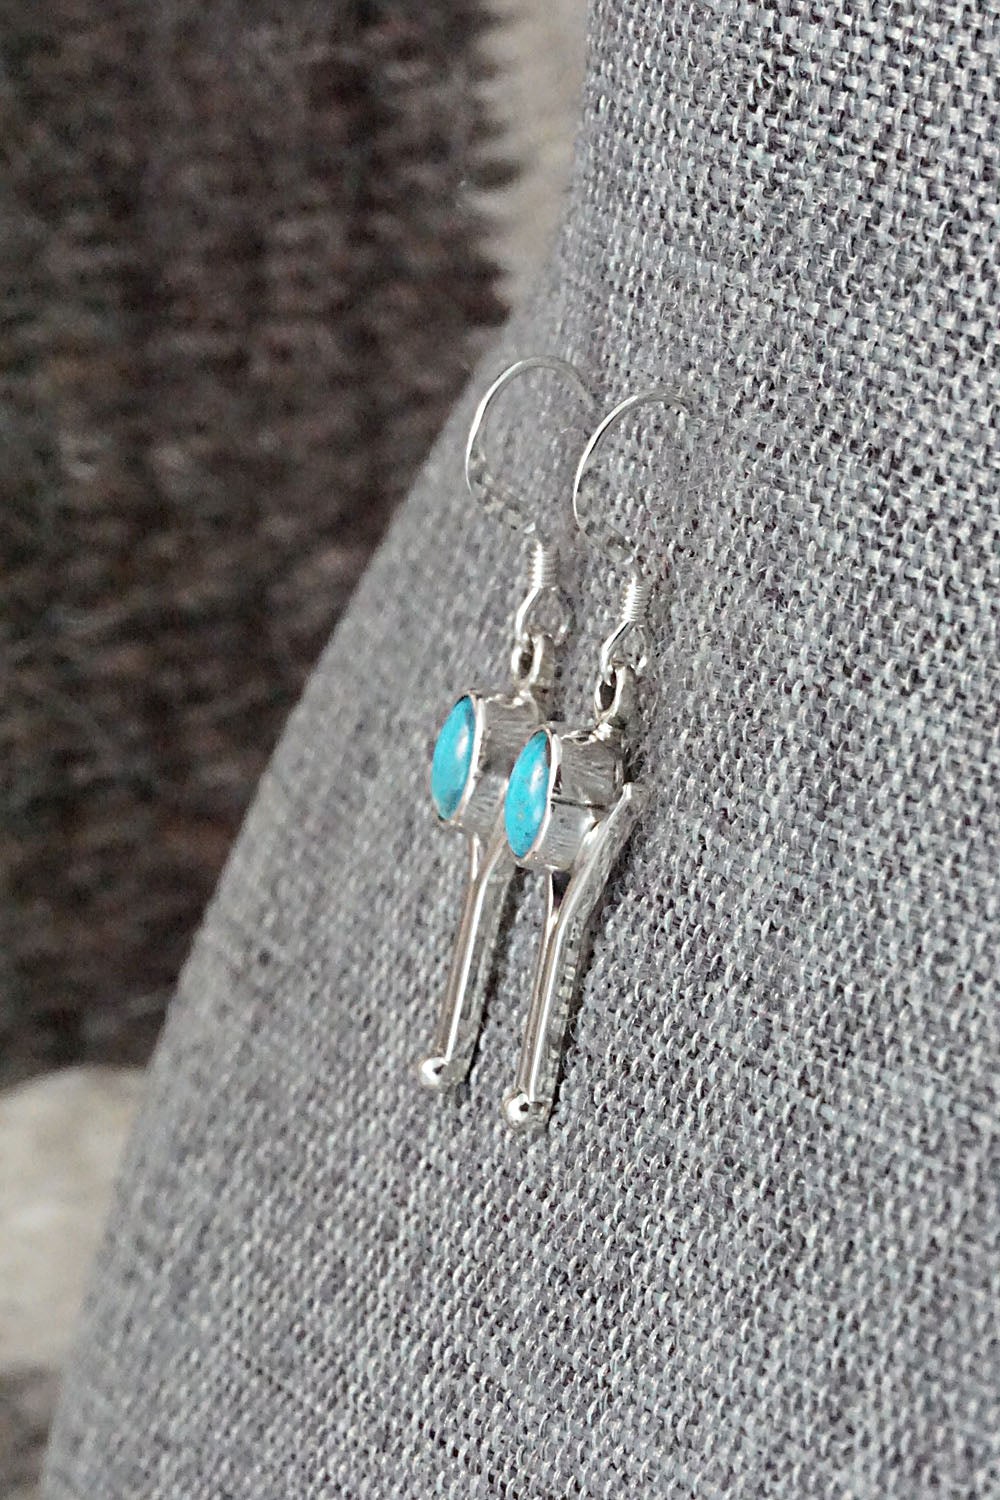 Turquoise & Sterling Silver Earrings - Gary Shorty